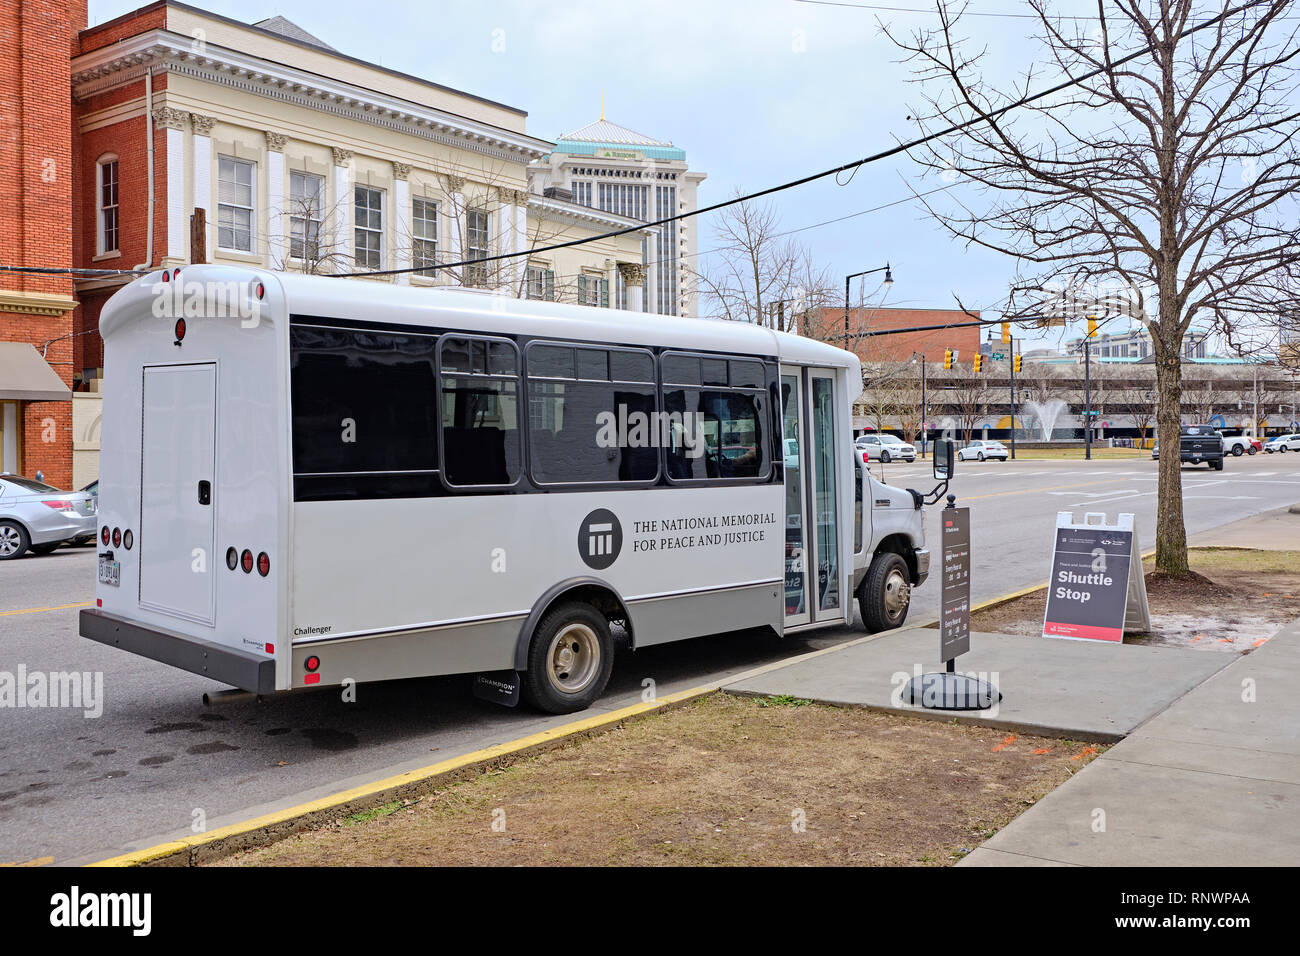 Small passenger tour bus for The National Memorial for Peace and Justice a civil rights organization in Montgomery Alabama, USA. Stock Photo